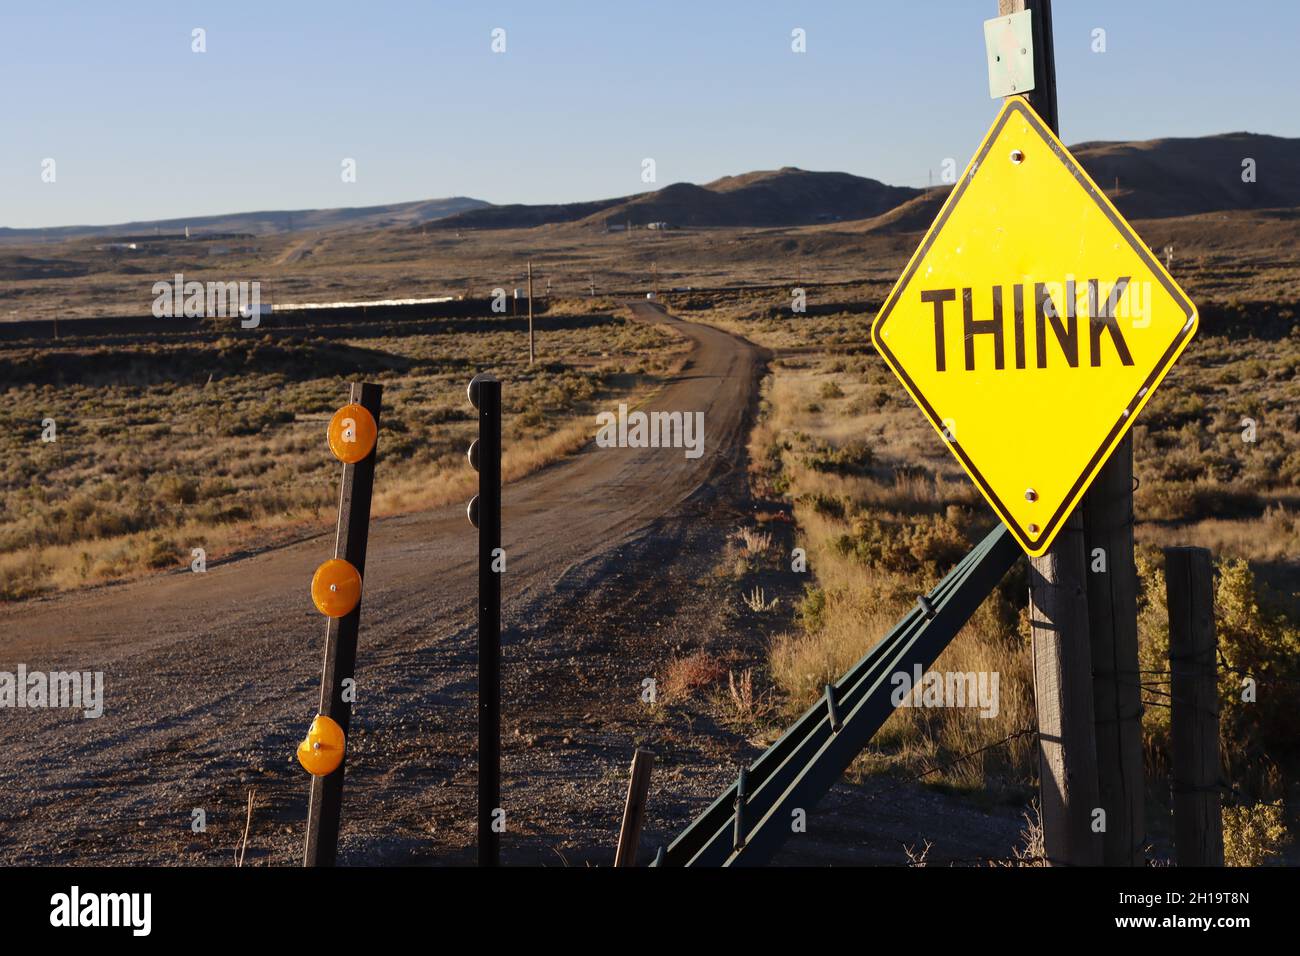 Think advisory sign on a country road Stock Photo